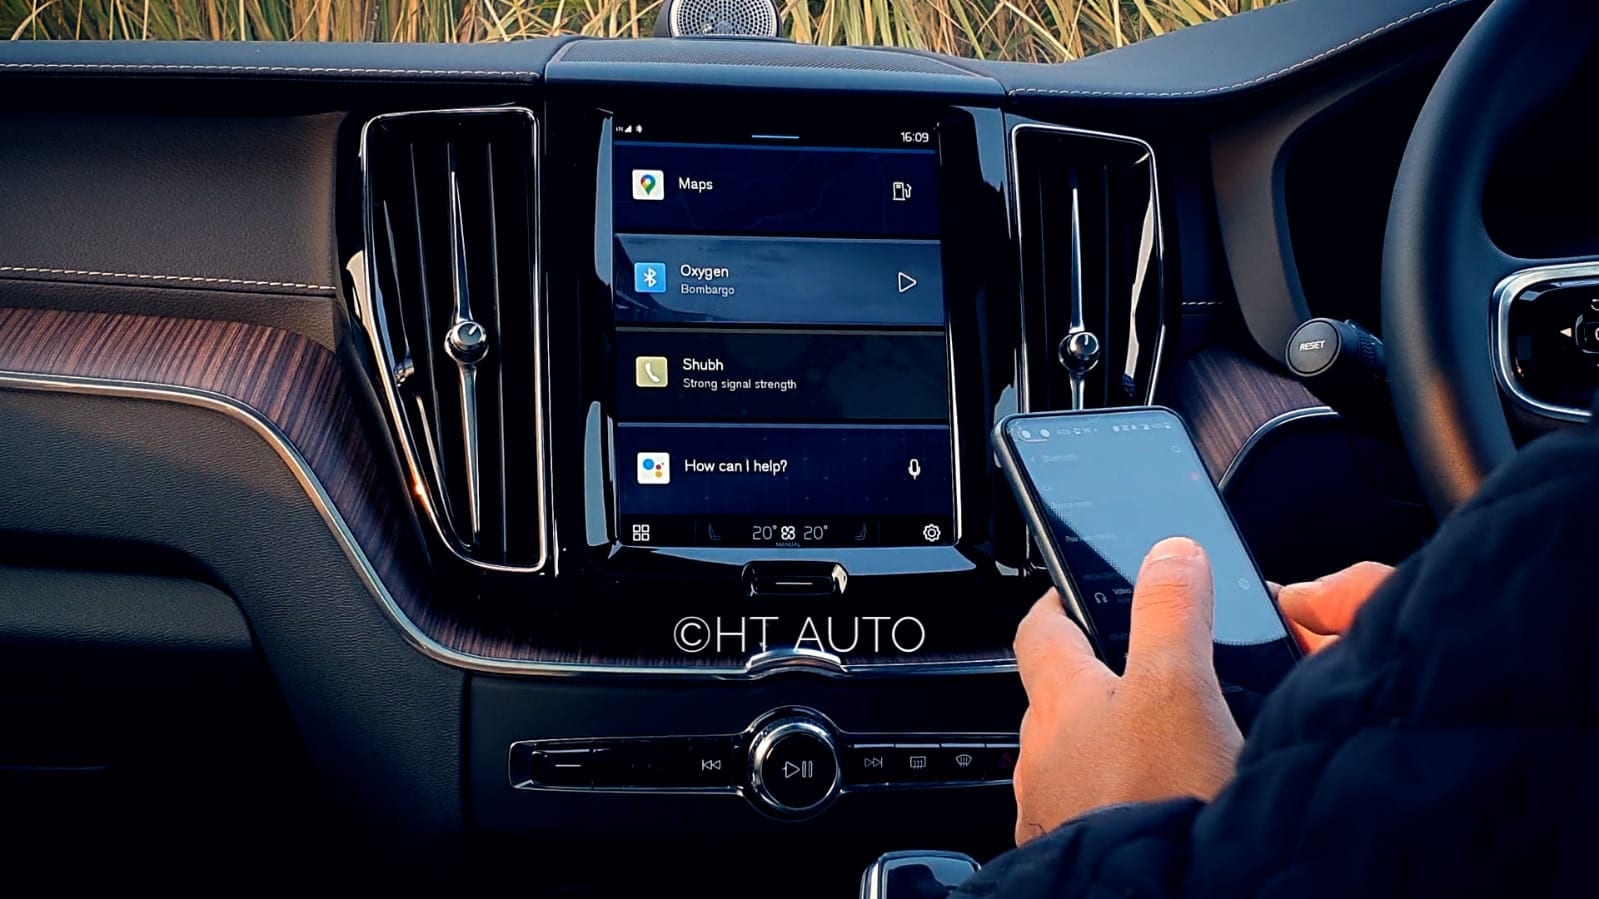 The Volvo app can be used to monitor a wide number of XC60-related functionalities.